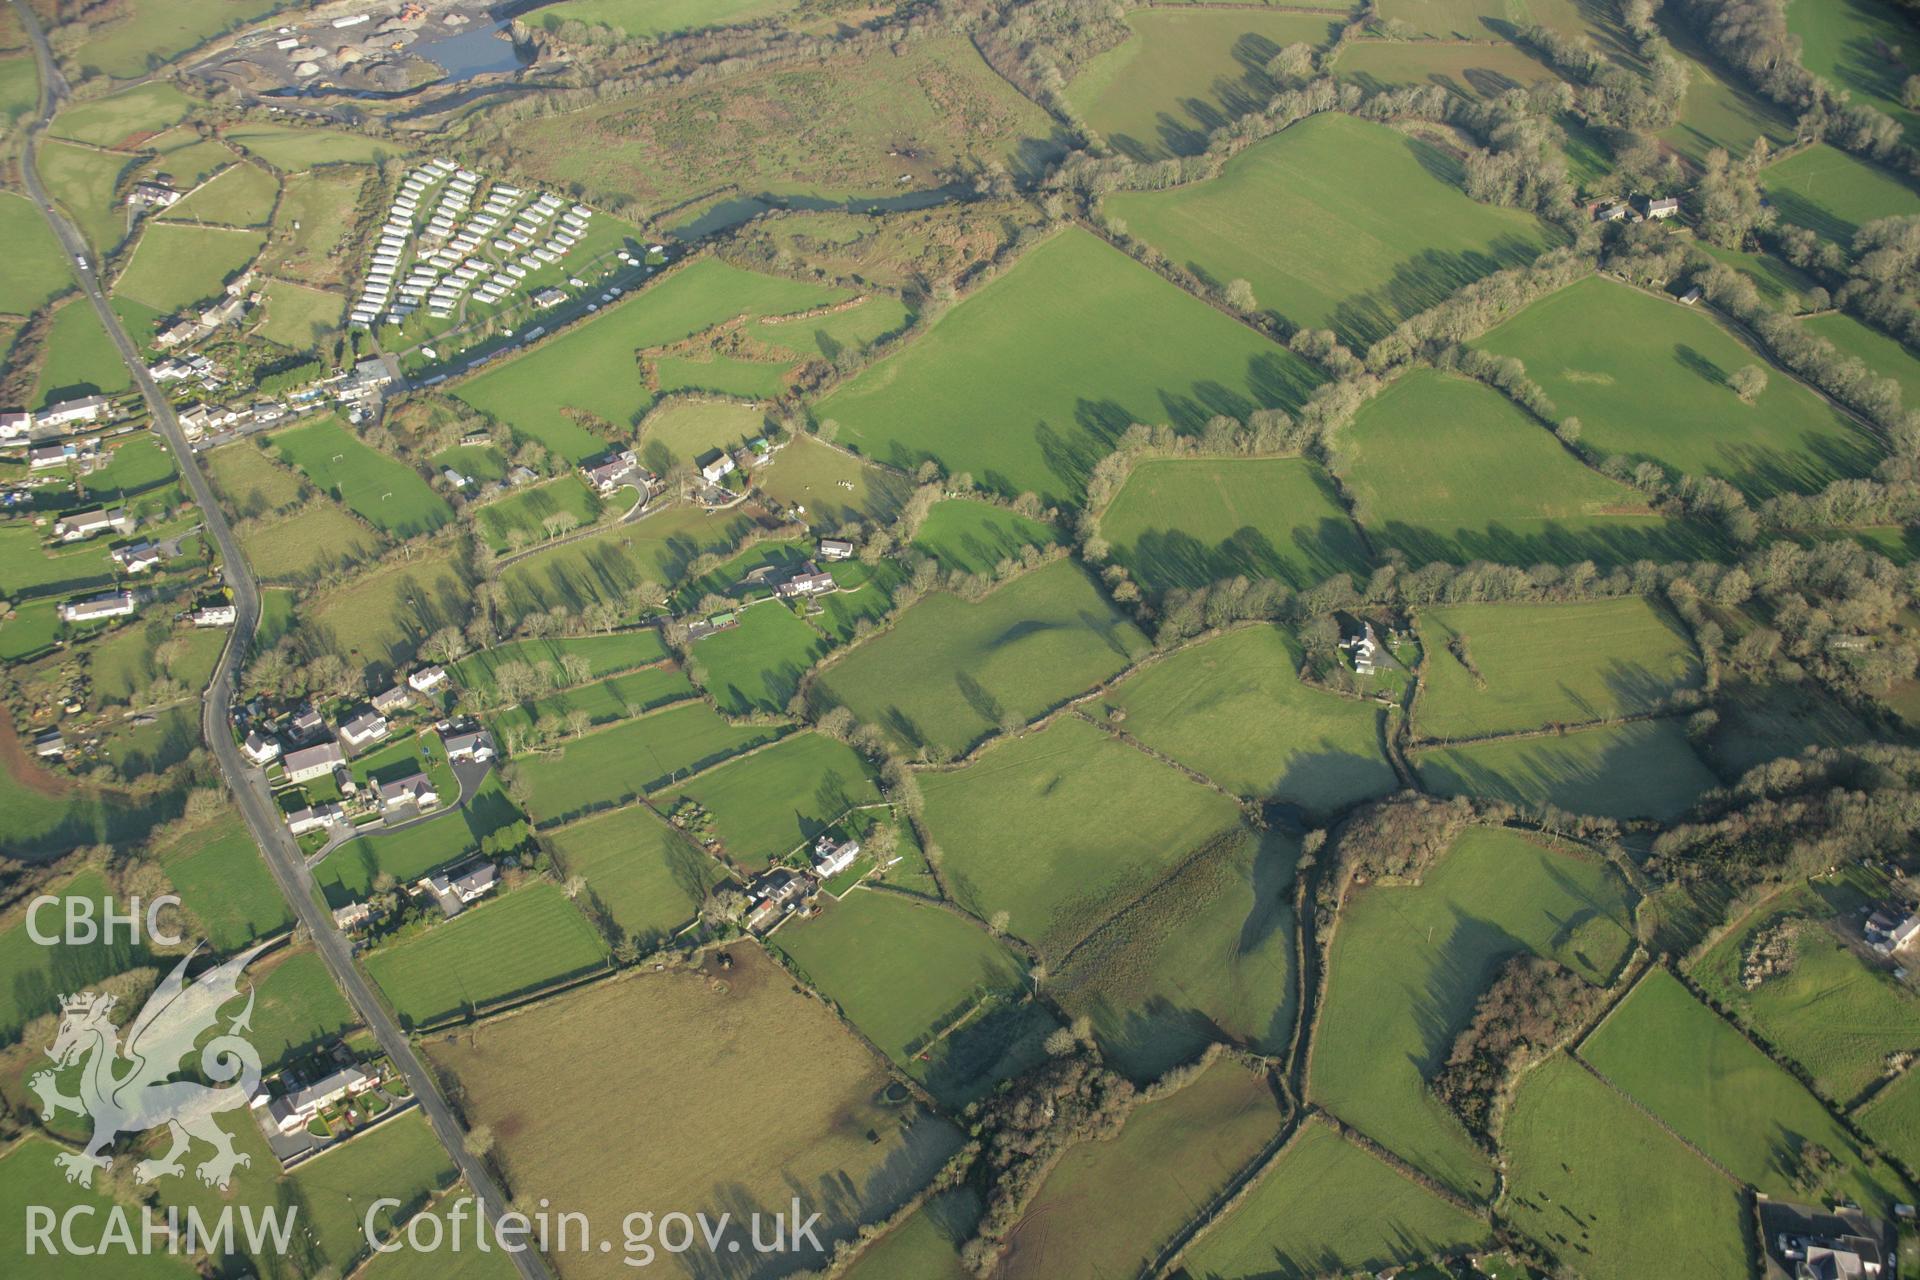 RCAHMW colour oblique aerial photograph of the Viking settlement at Glyn, Llanbedrgoch, and the surrounding landscape. Taken on 25 January 2007 by Toby Driver